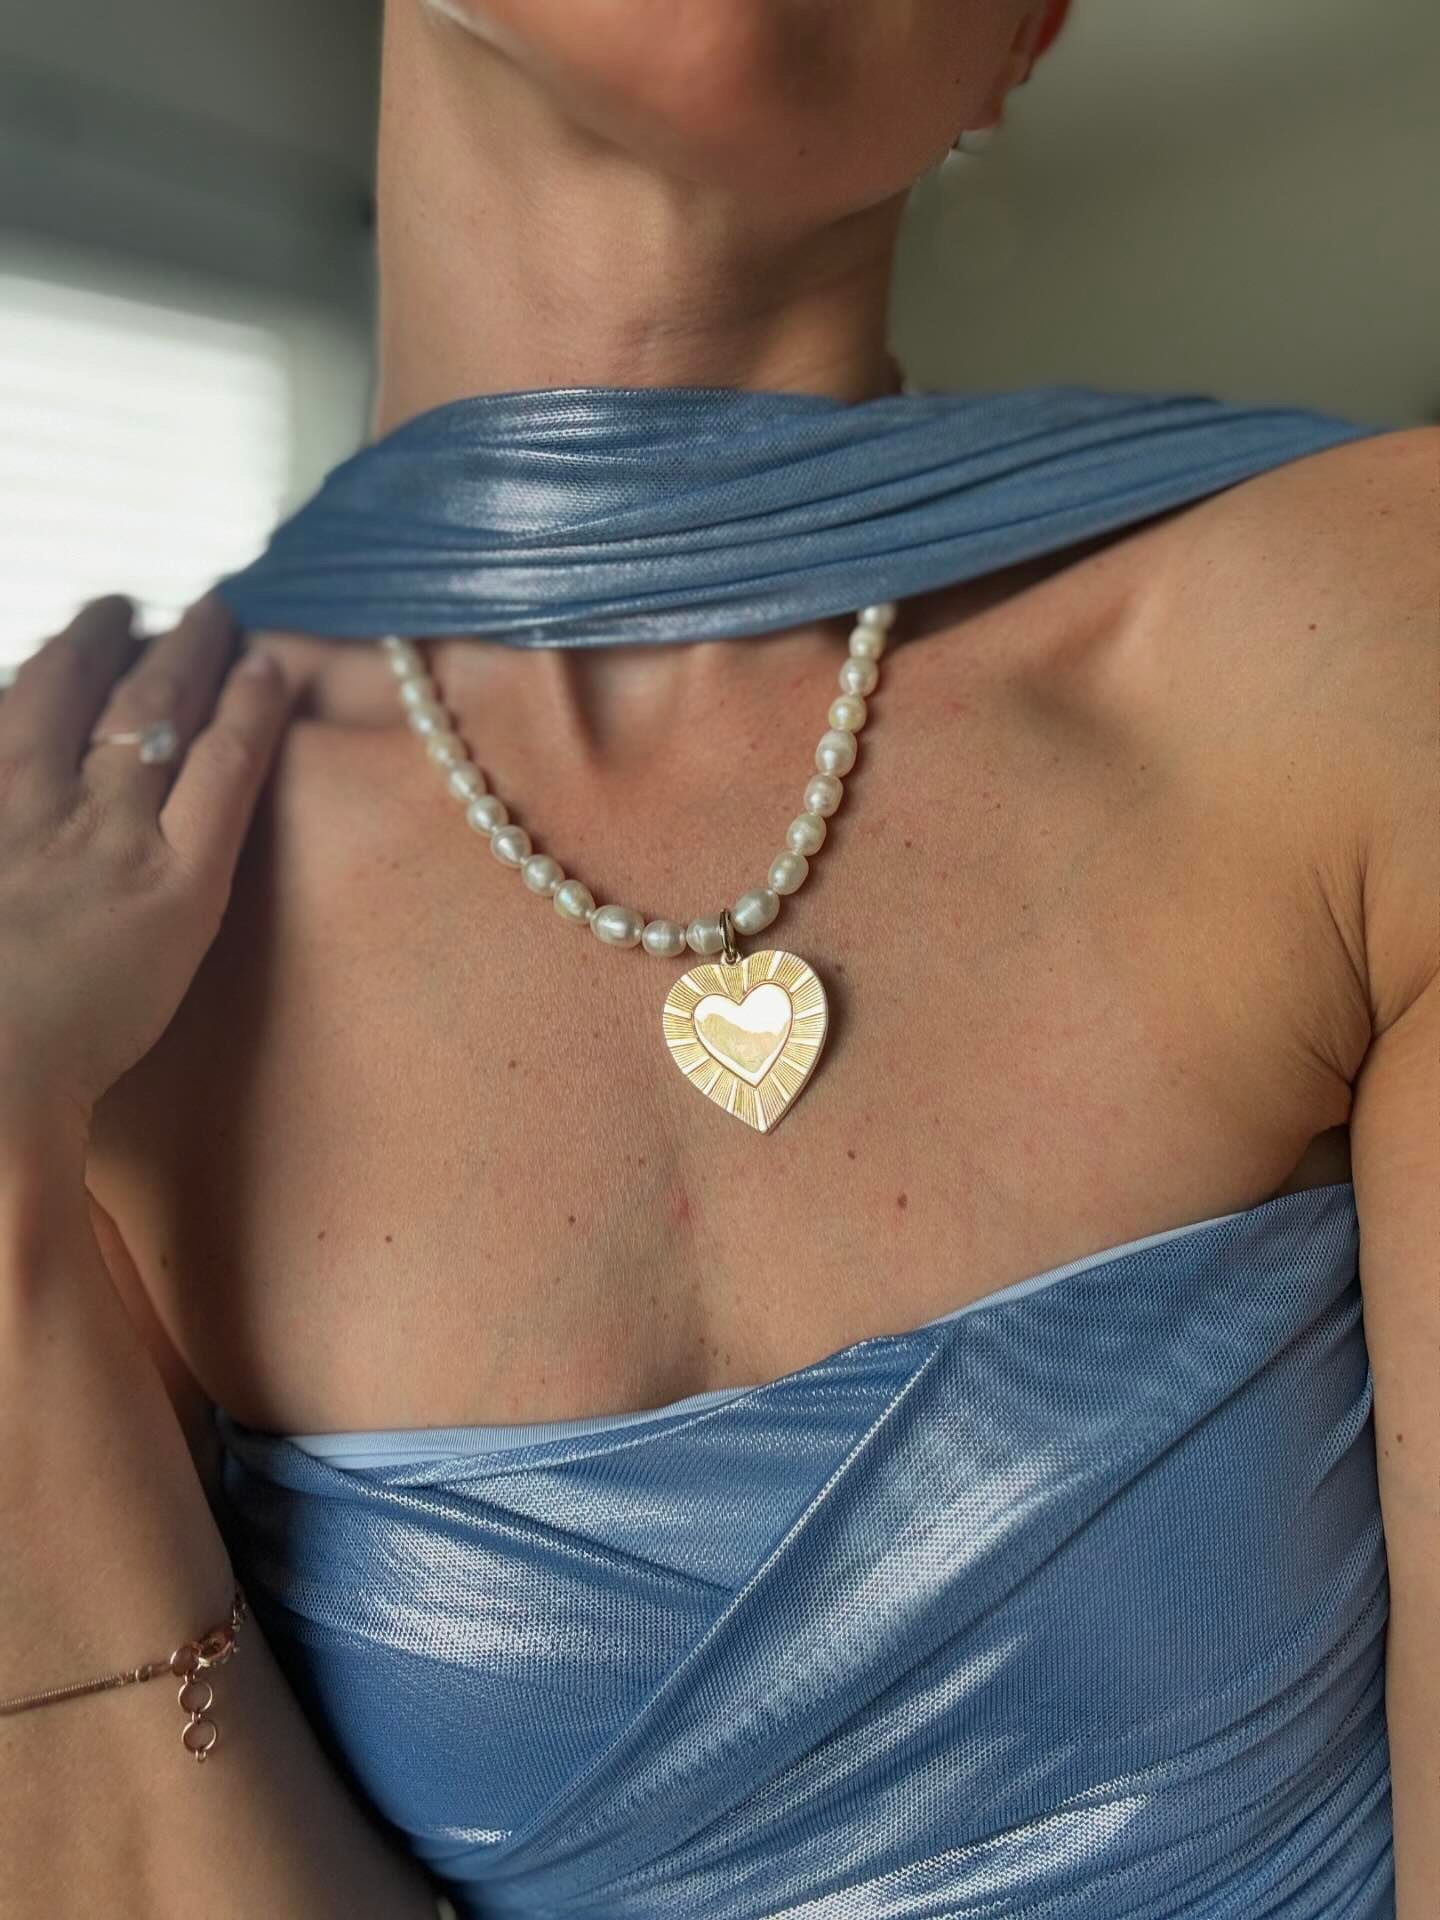 a woman wearing a necklace with a heart pendant